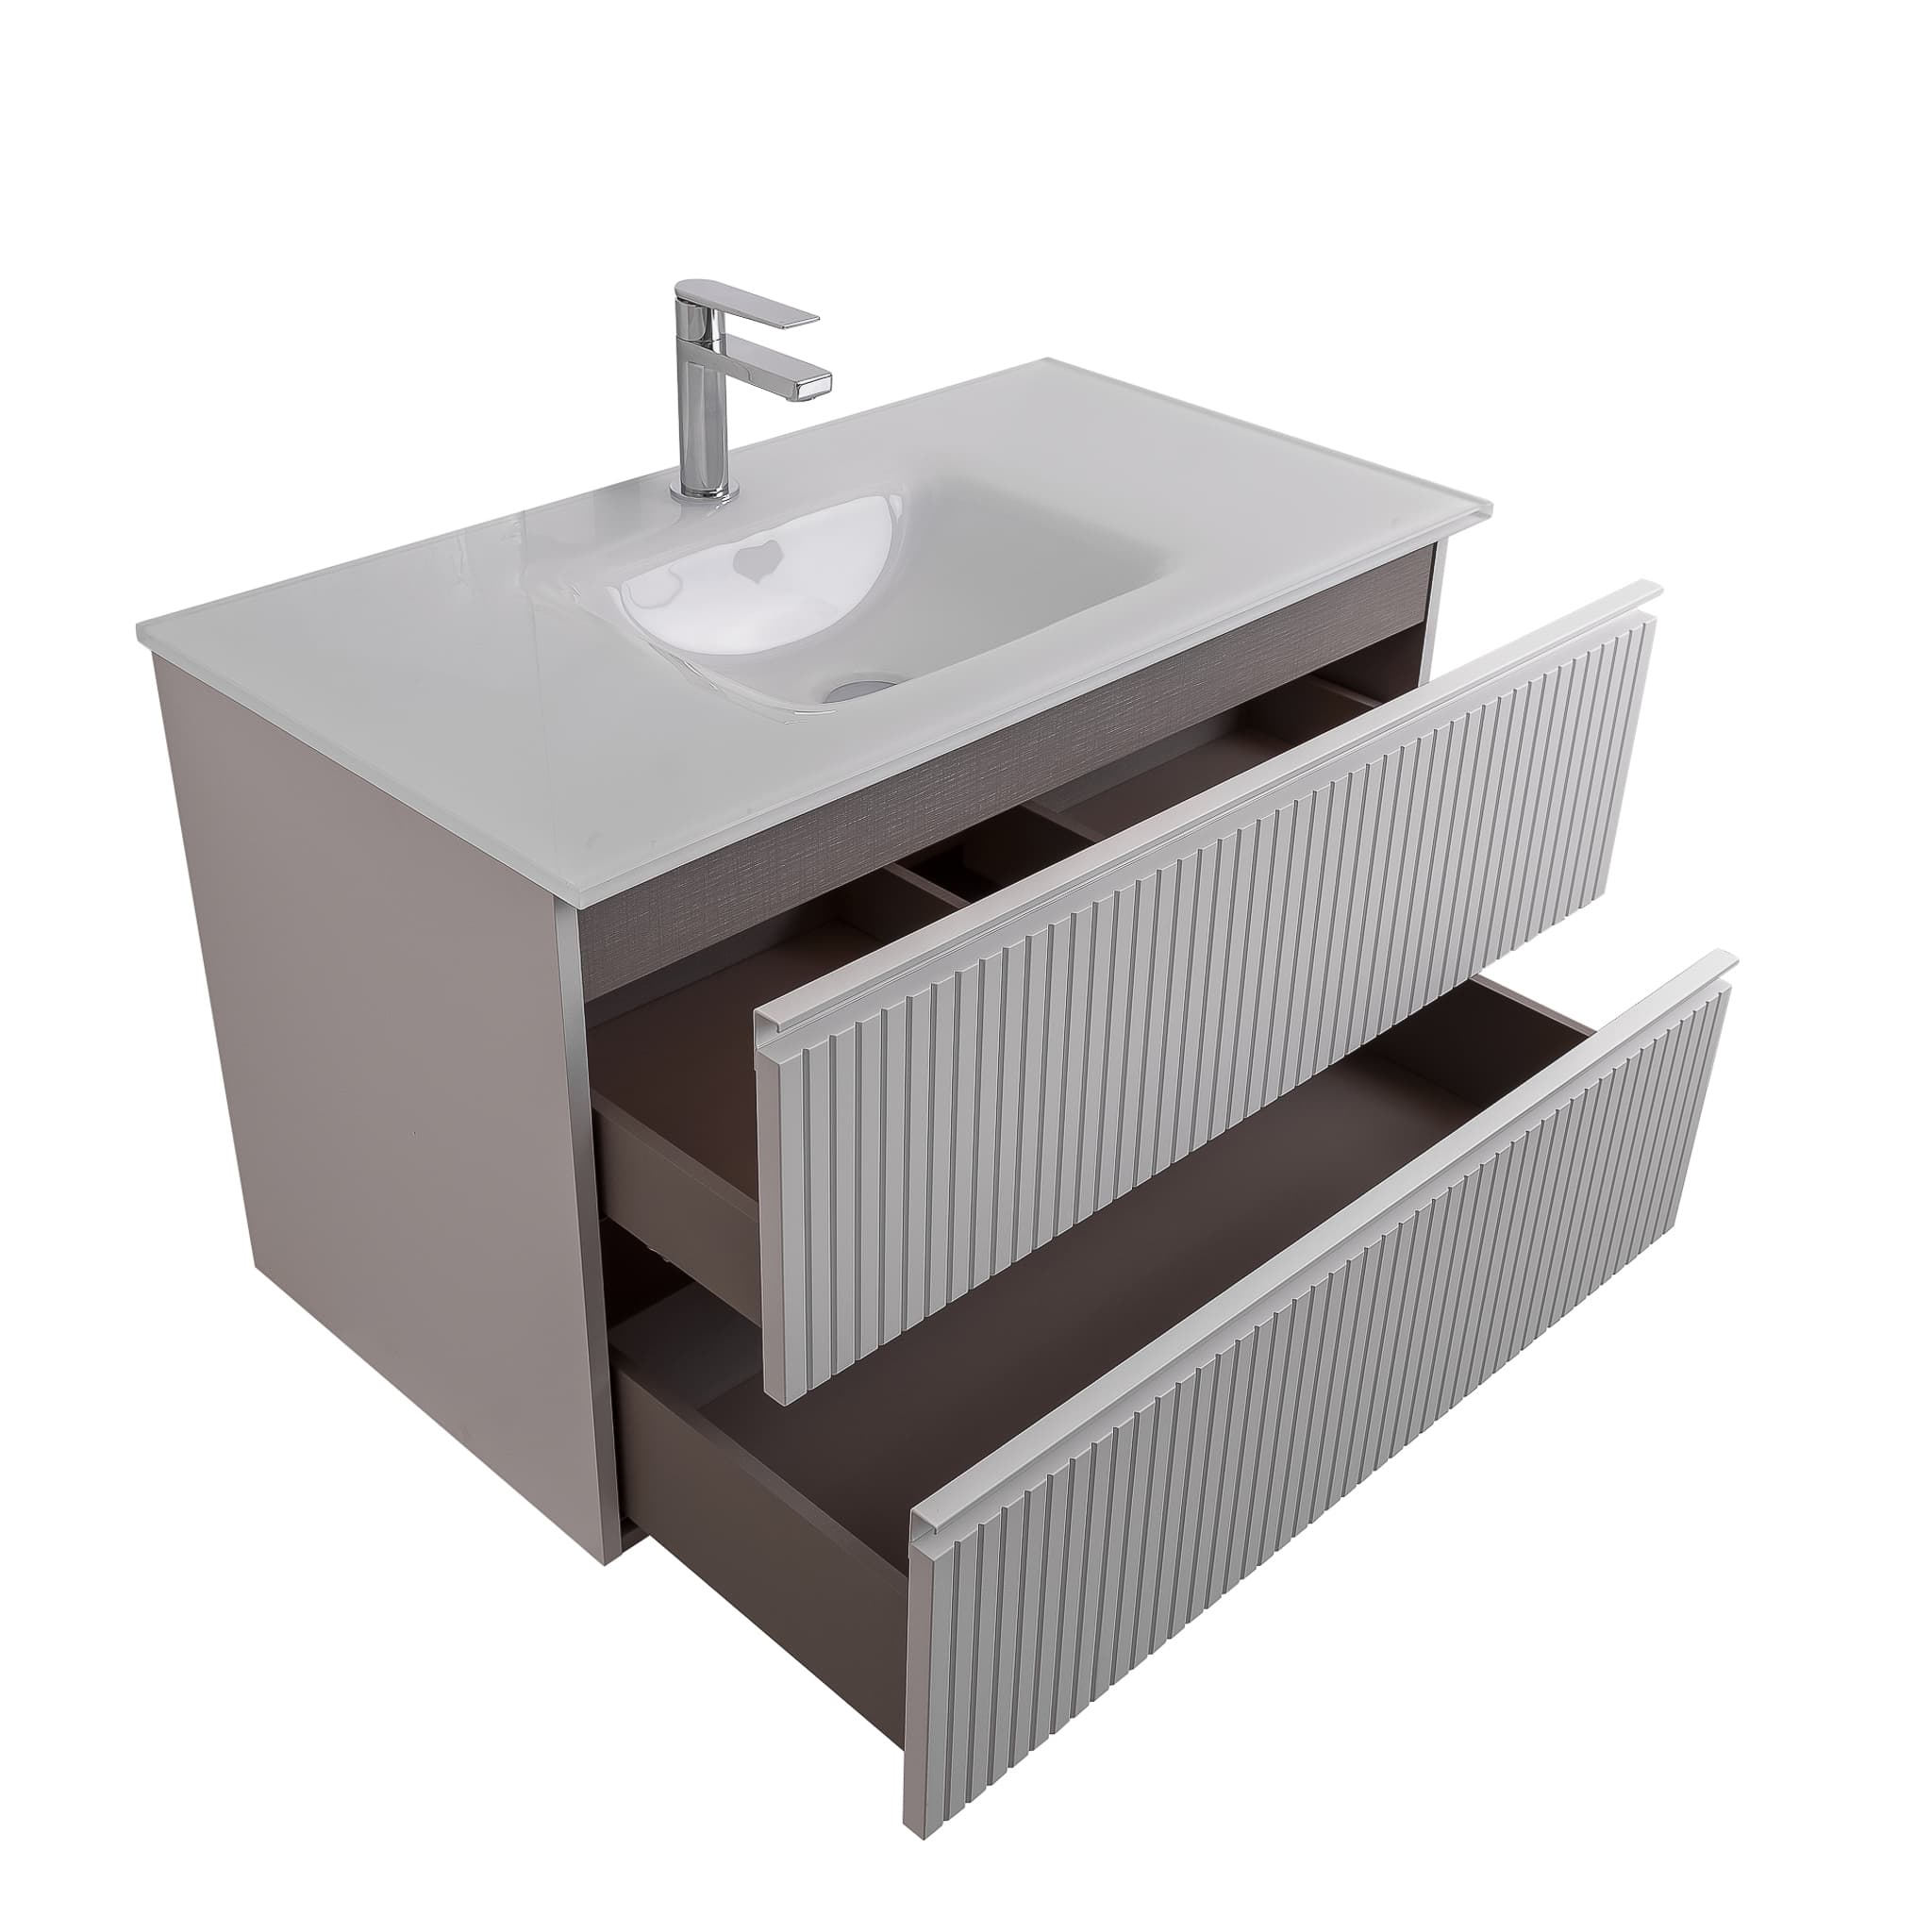 Ares 35.5 Matte White Cabinet, White Tempered Glass Sink, Wall Mounted Modern Vanity Set